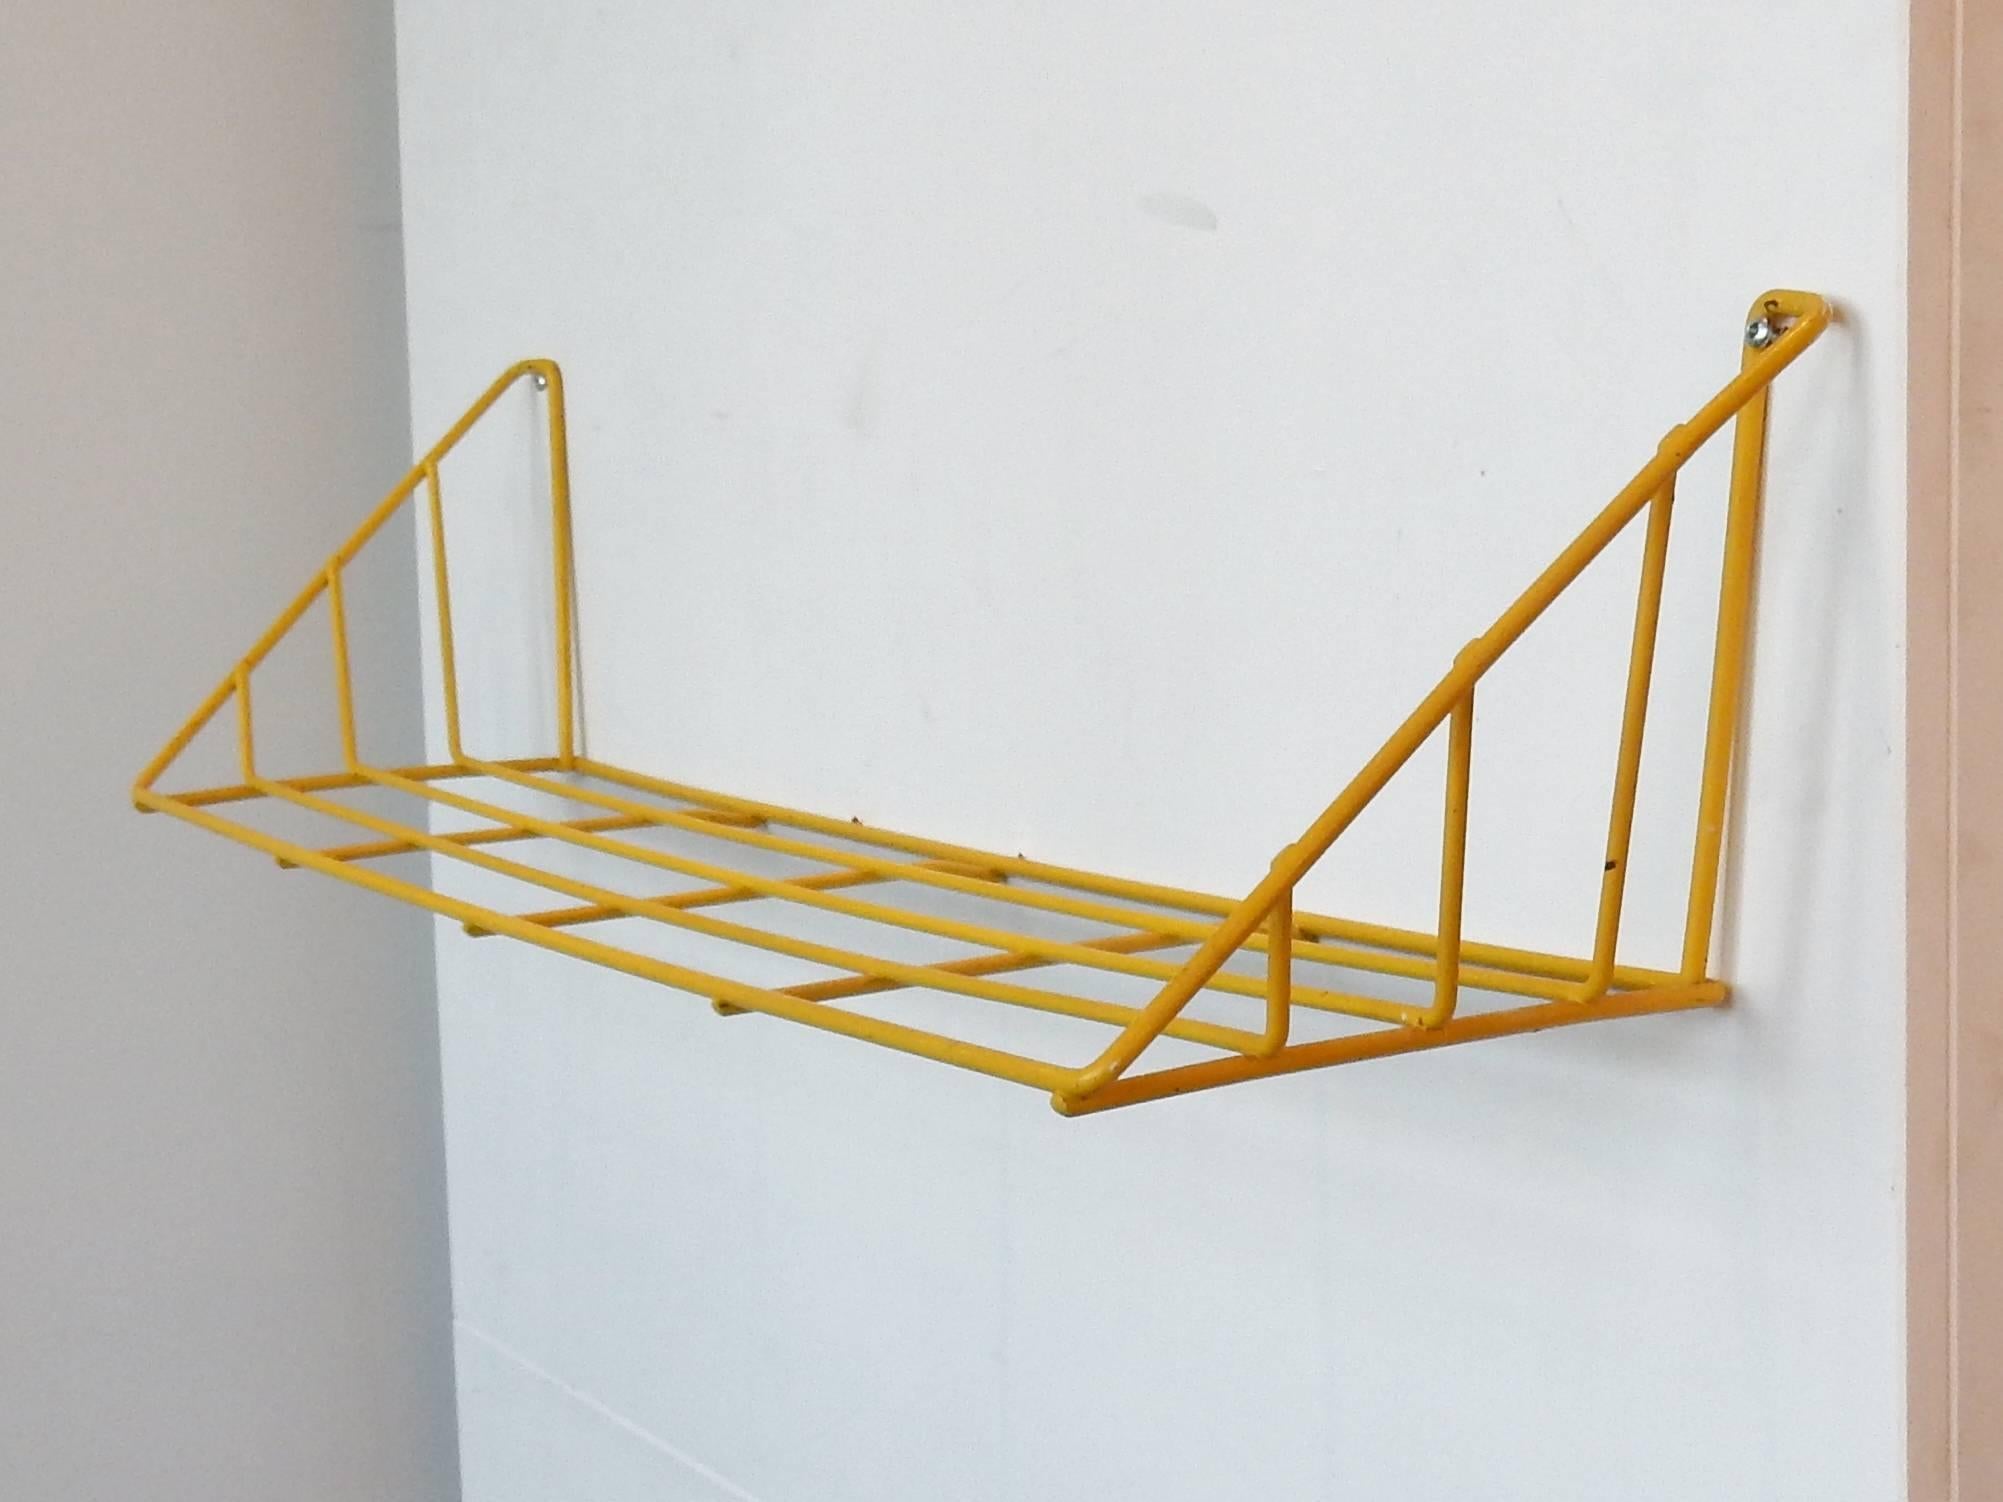 Metal Highly Rare Set of Two 'Delft' Wall Shelves by Cobra Artist Constant Nieuwenhuys